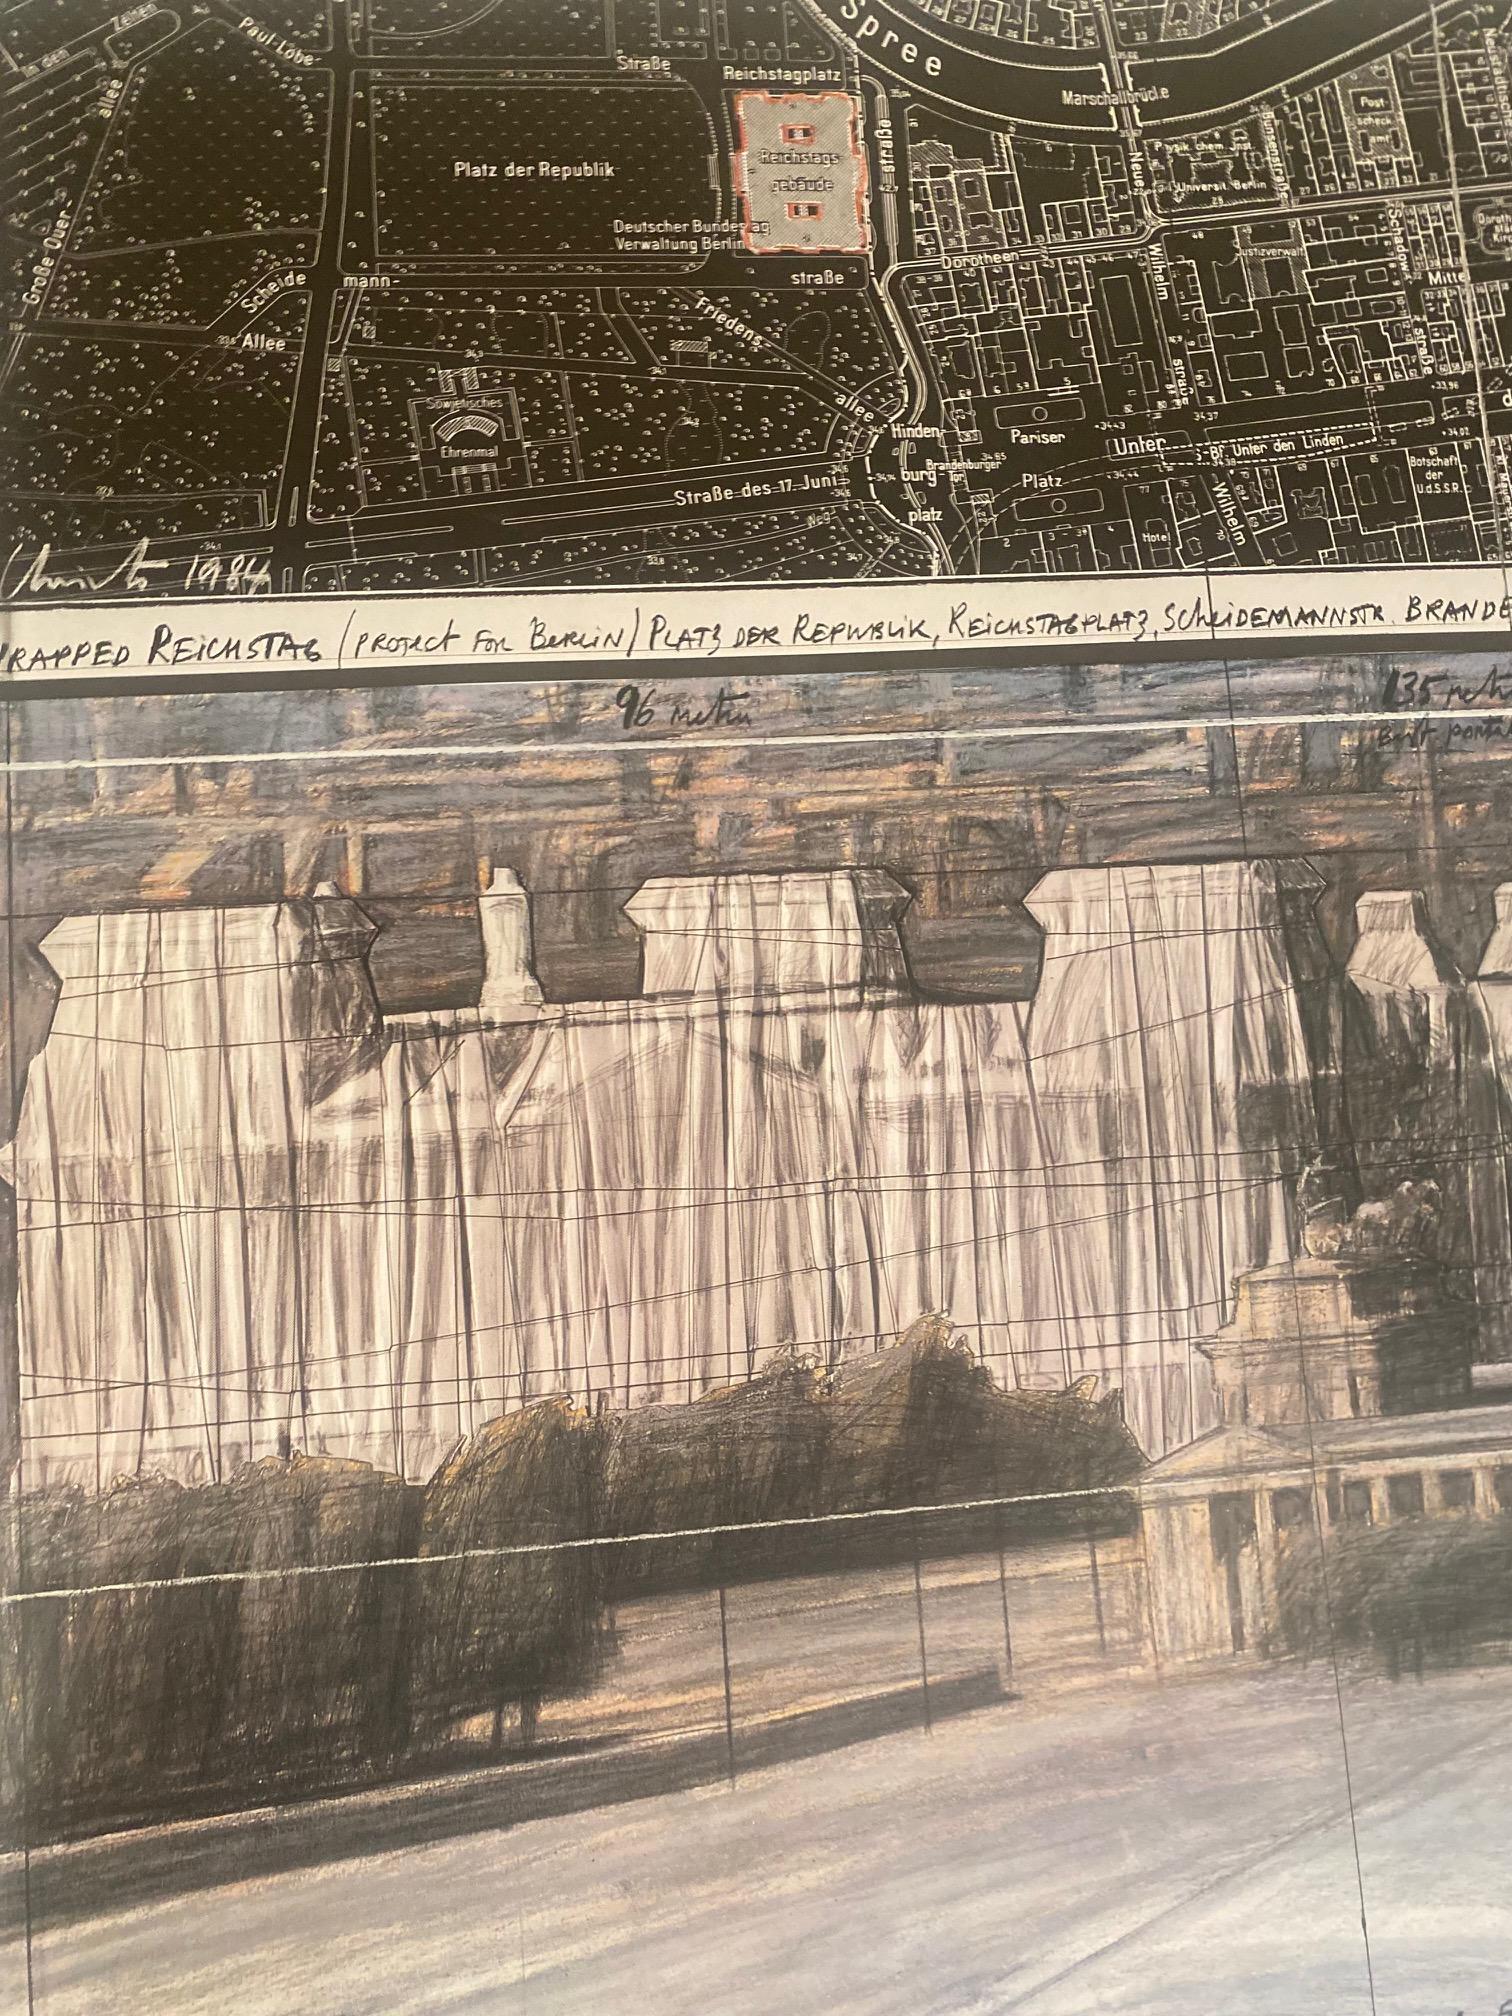 Wrapped Reichstag - original Christo modern art lithograph Berlin Reichstag For Sale 2